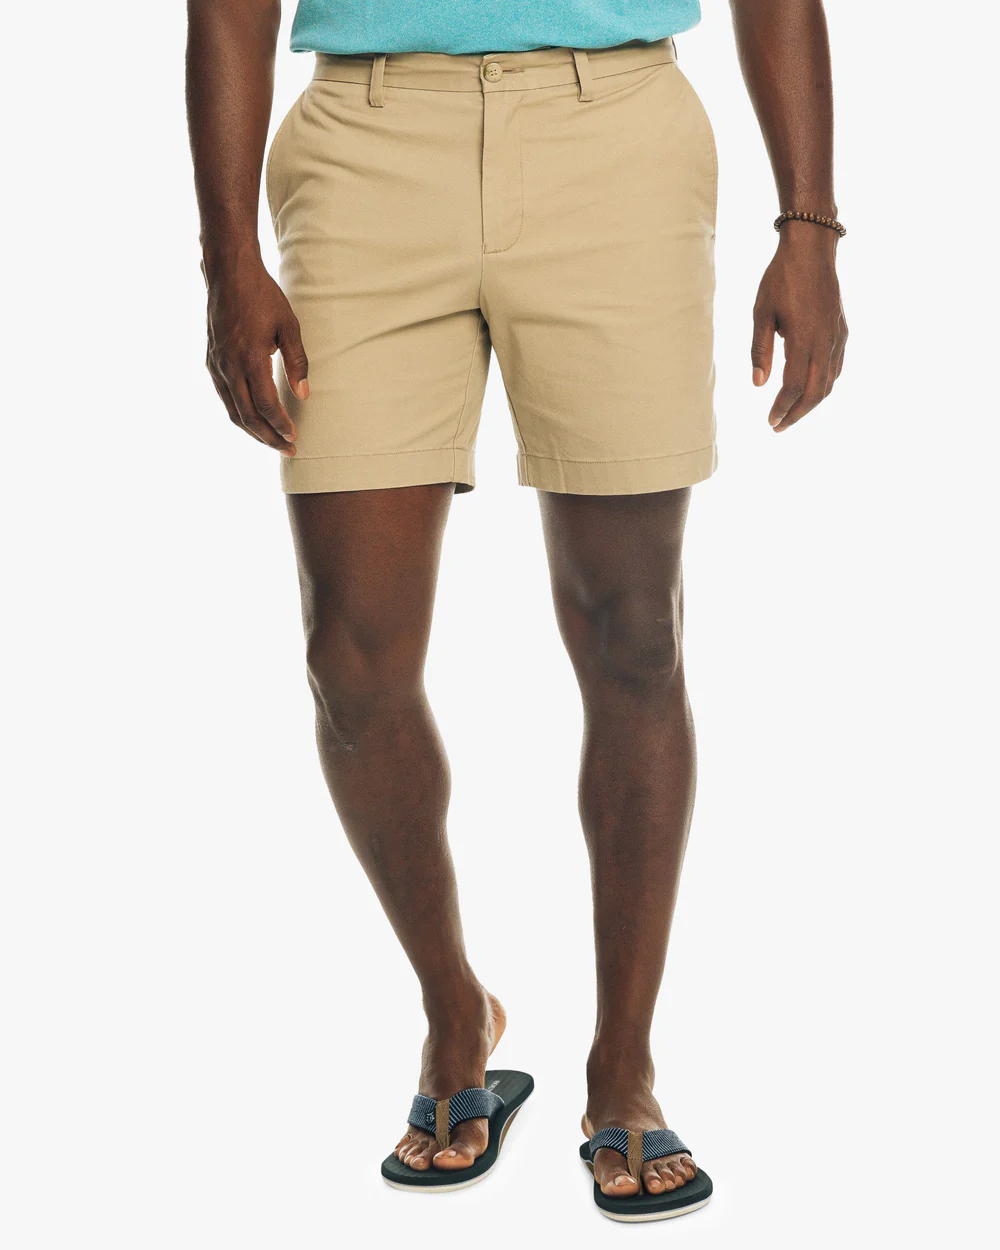 Men's khaki shorts, when it comes to styling men's khaki shorts, there are certain matching rules and guidelines that can help you create